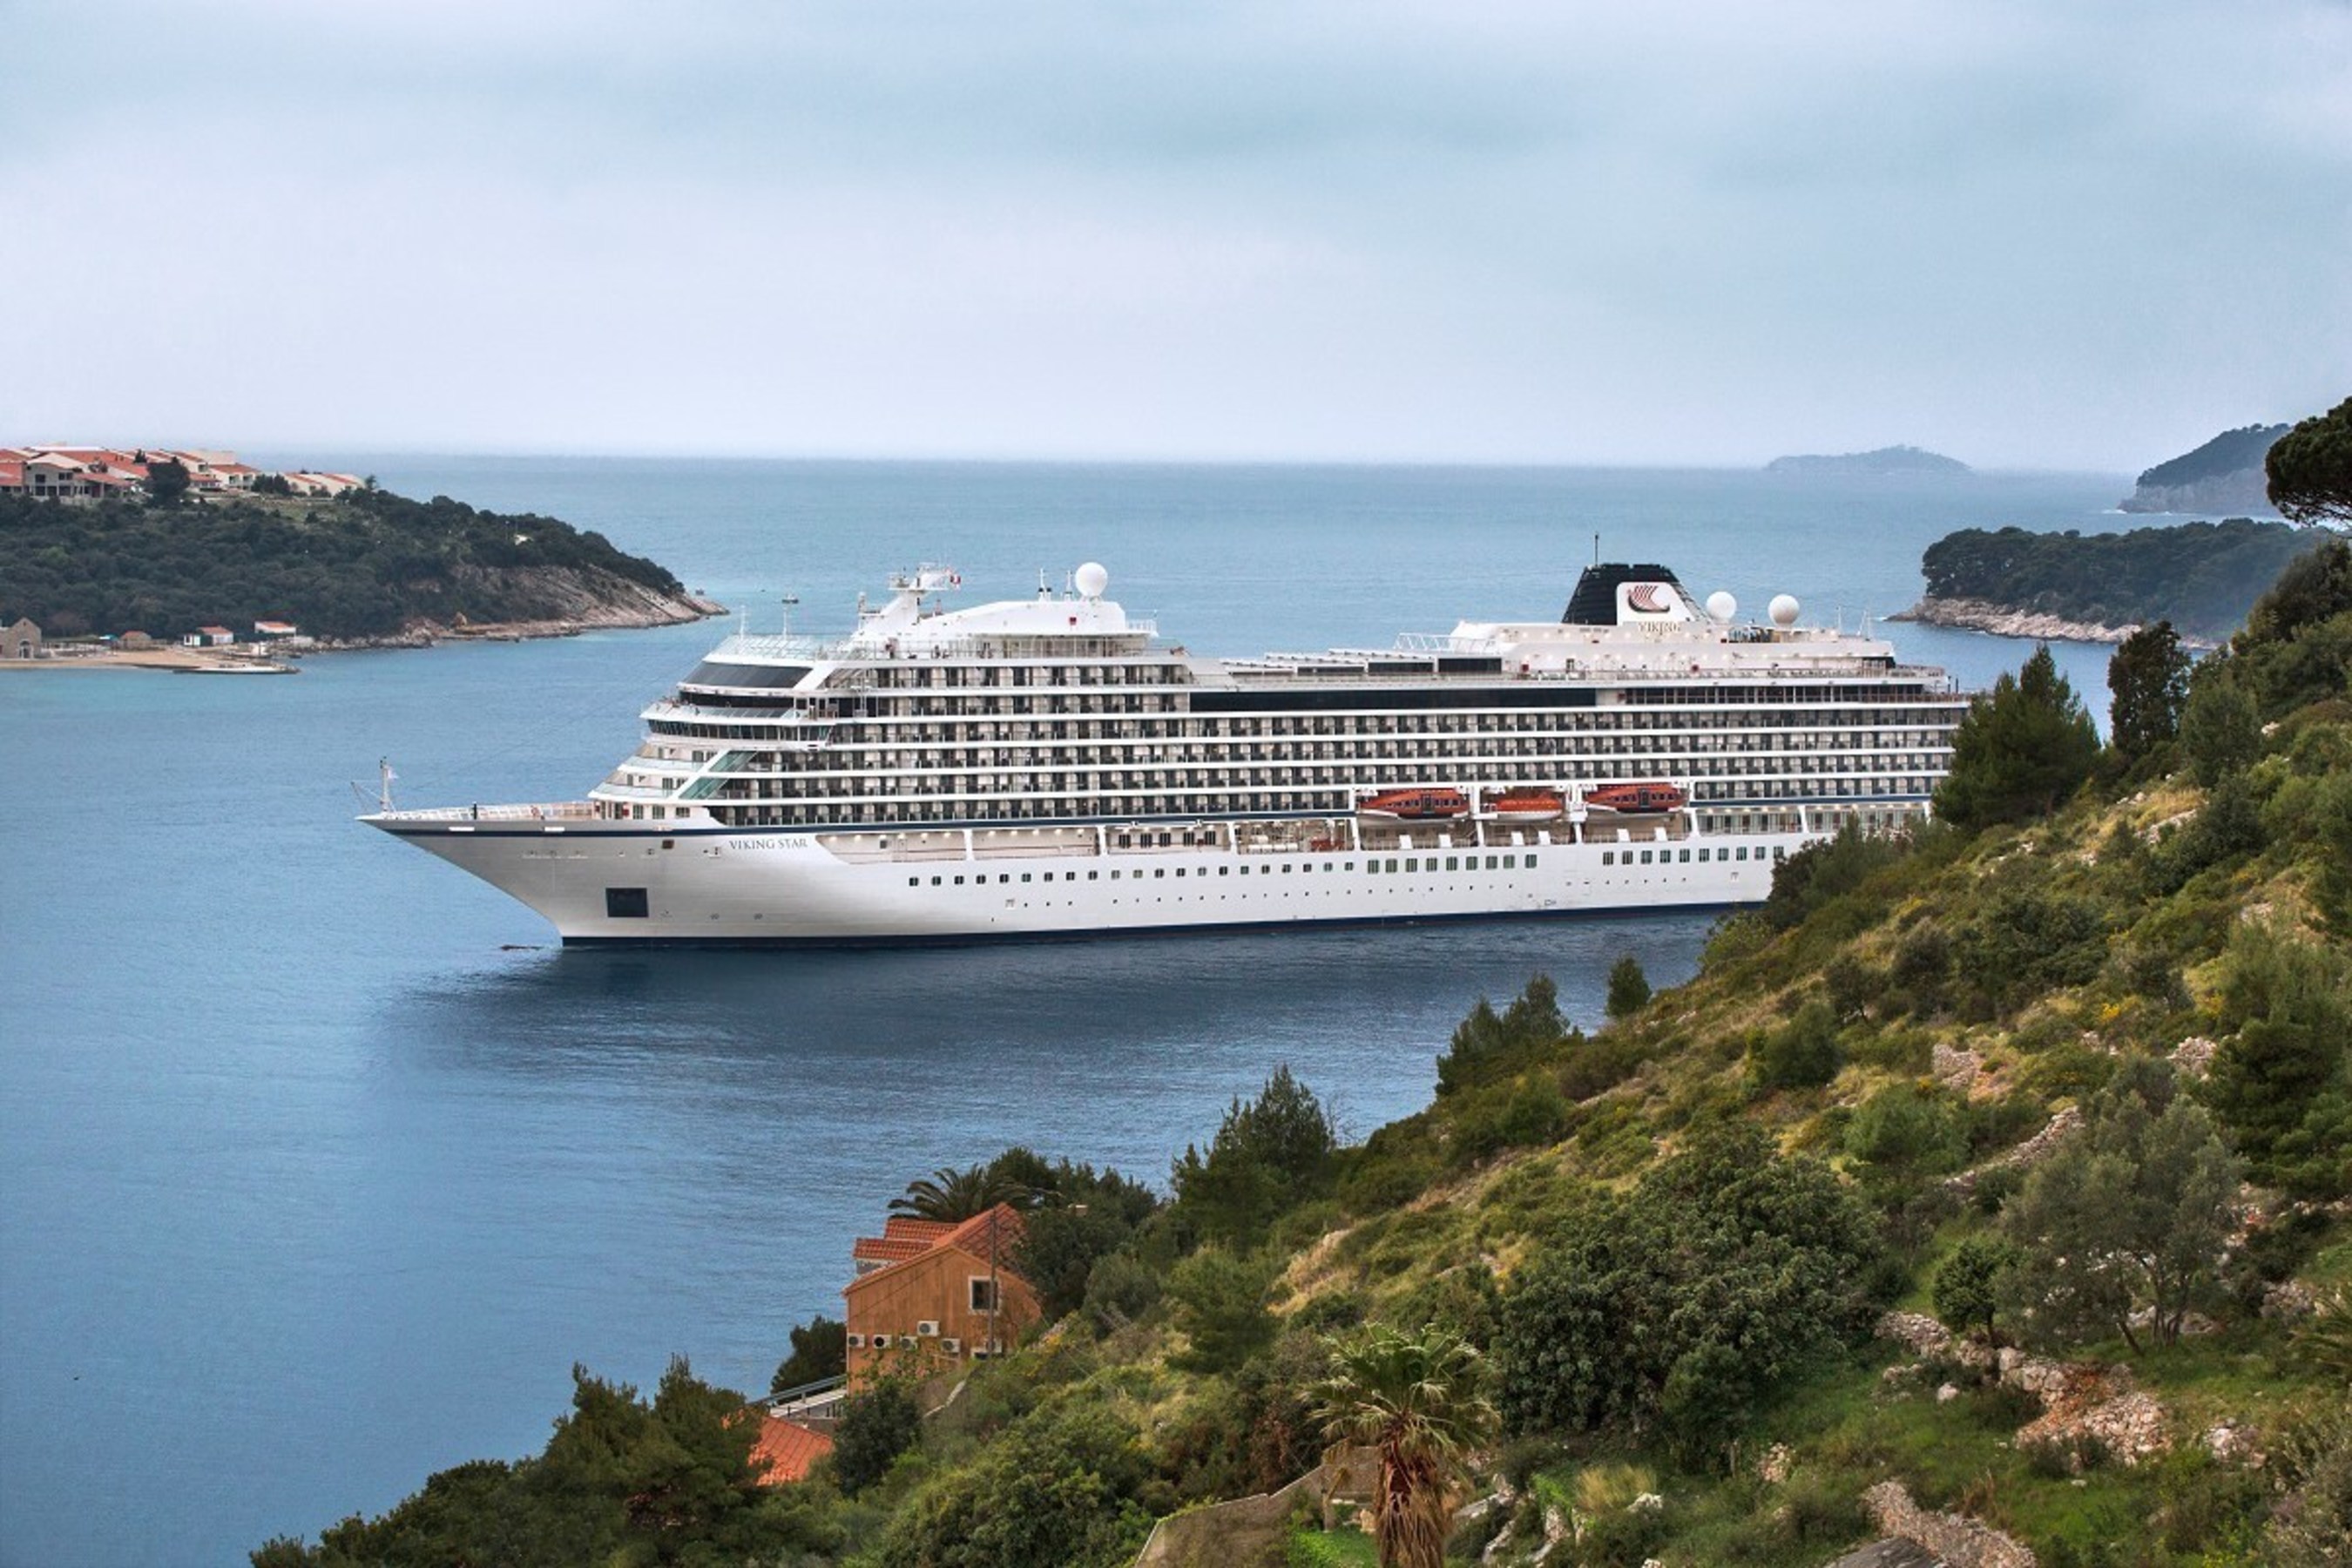 The recently christened Viking Star, Viking Ocean Cruises' first ship, sailing through Dubrovnik. The company has not only added sailing dates to existing itineraries, but has also created four new enrichment-filled programs that will take guests from the sun-soaked region of the Mediterranean to the cultural capital of St. Petersburg - all of which are now open for booking.